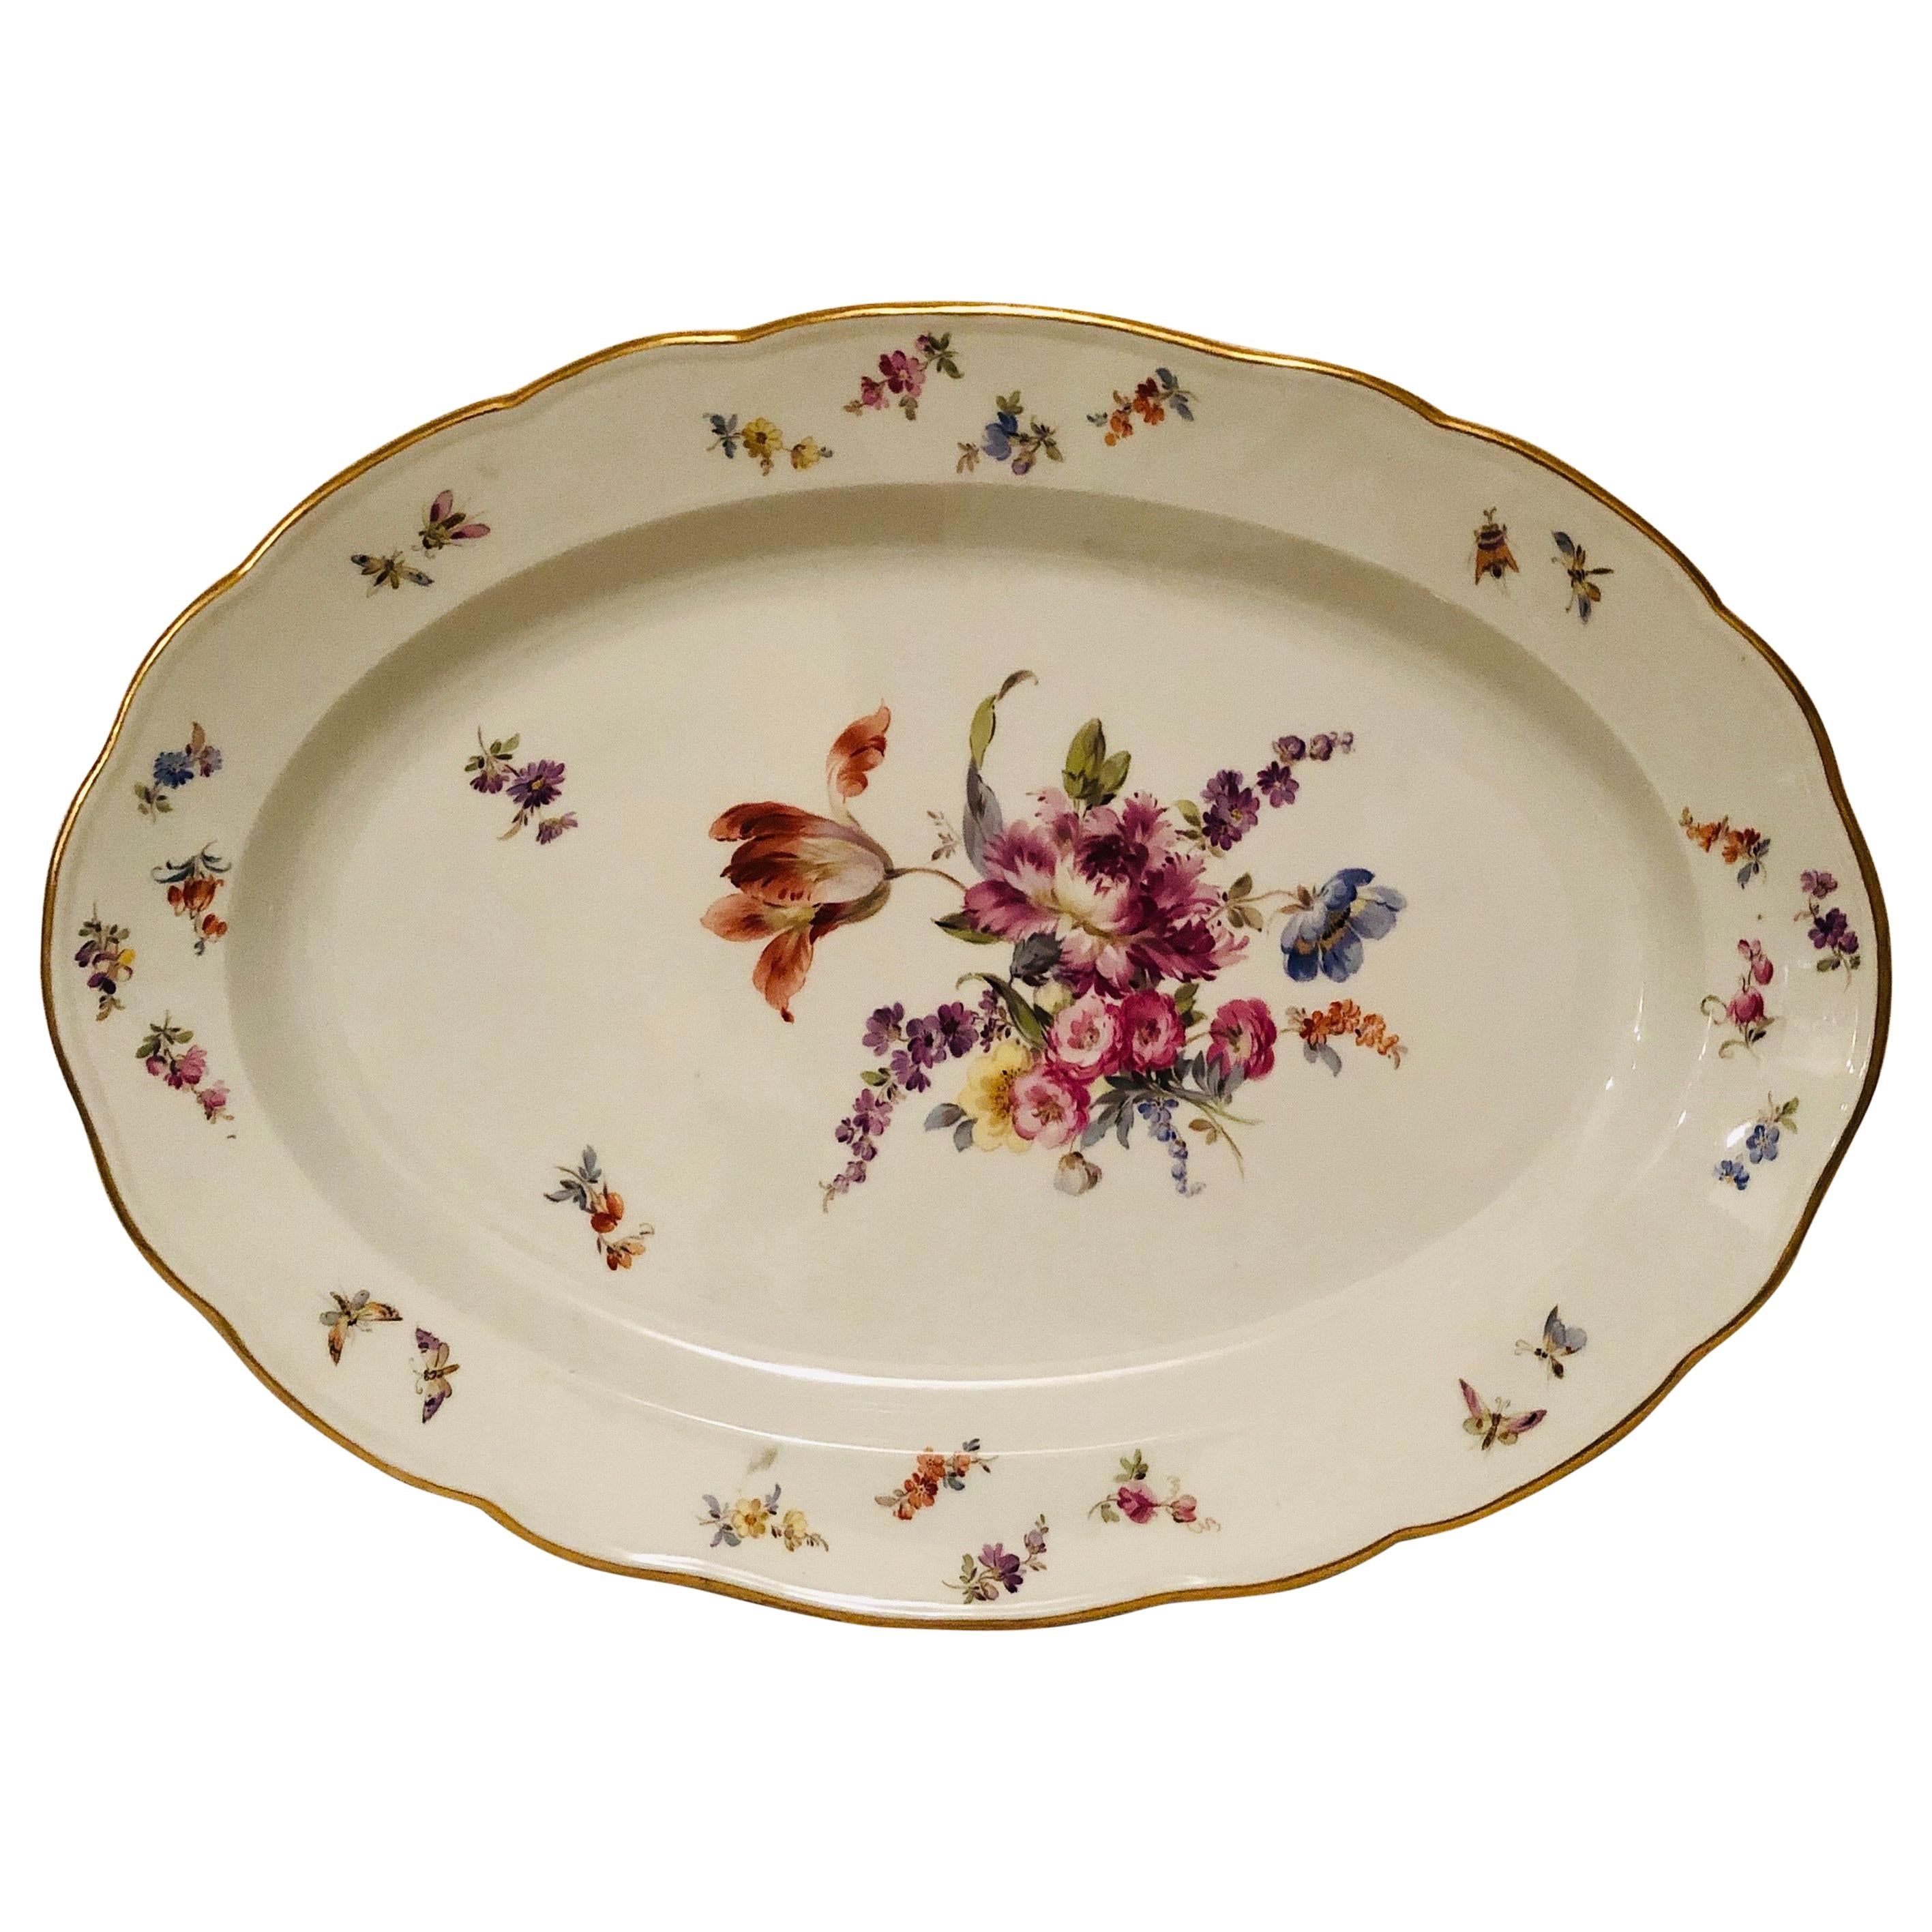 Large Meissen Platter with Fabulous Painting of a Bouquet of Flowers and Insects